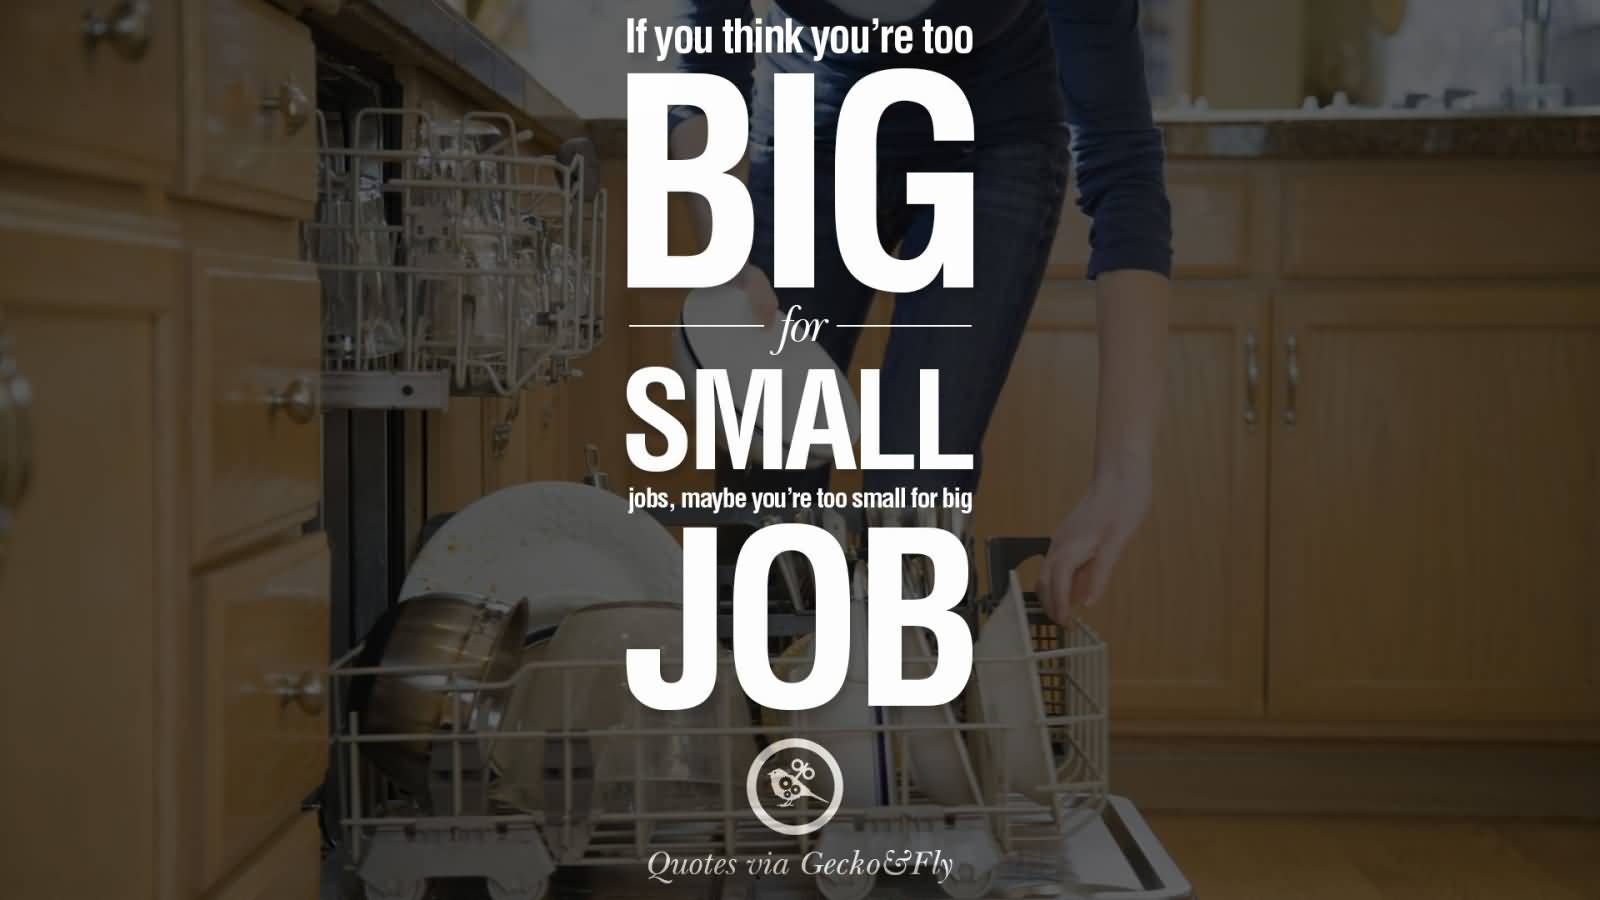 If you think you're too big for small jobs, maybe you're too small for big job.